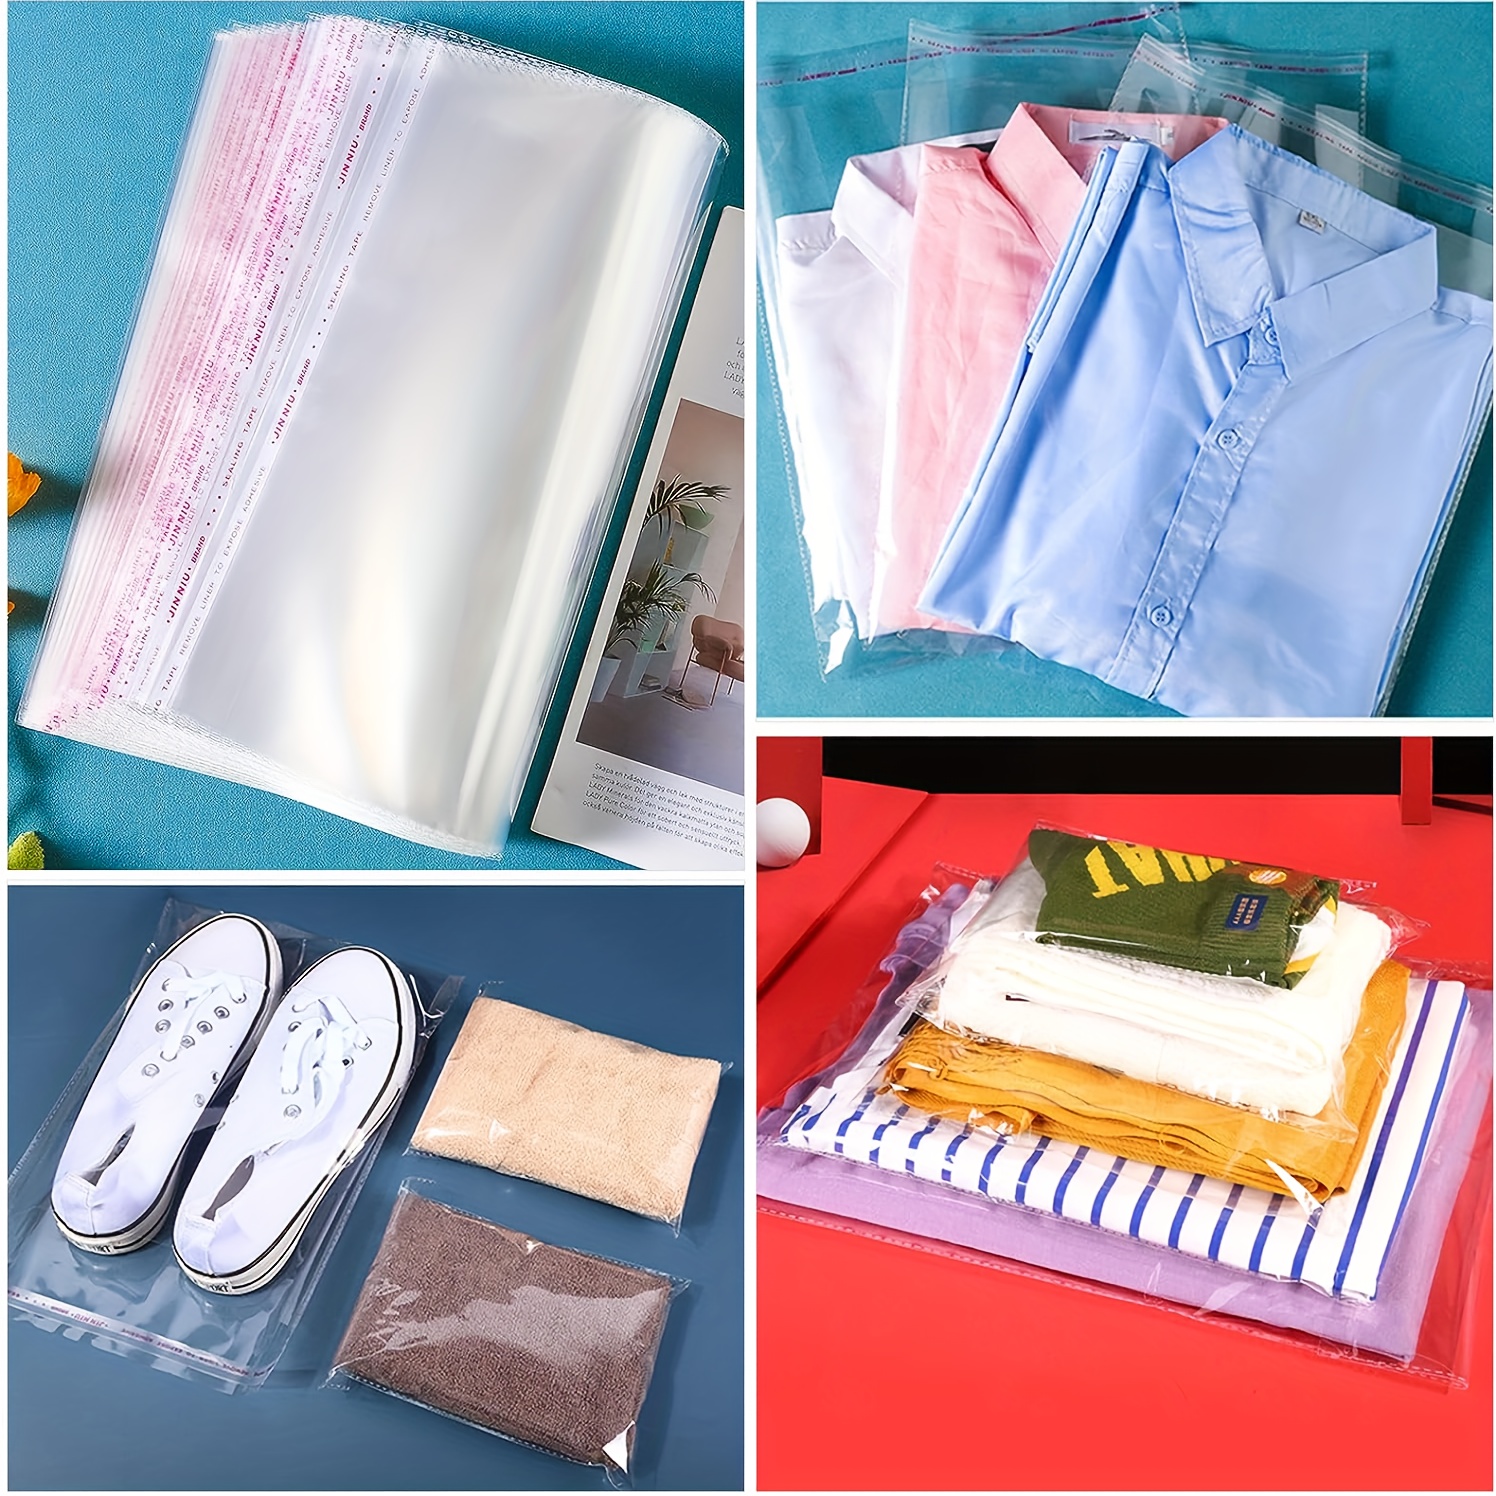 100 Pieces (9x12 Inch) Clear Plastic Bags for Packaging, Clothing &  T-Shirts Strong Packing Self Adhesive Cellophane Bag 